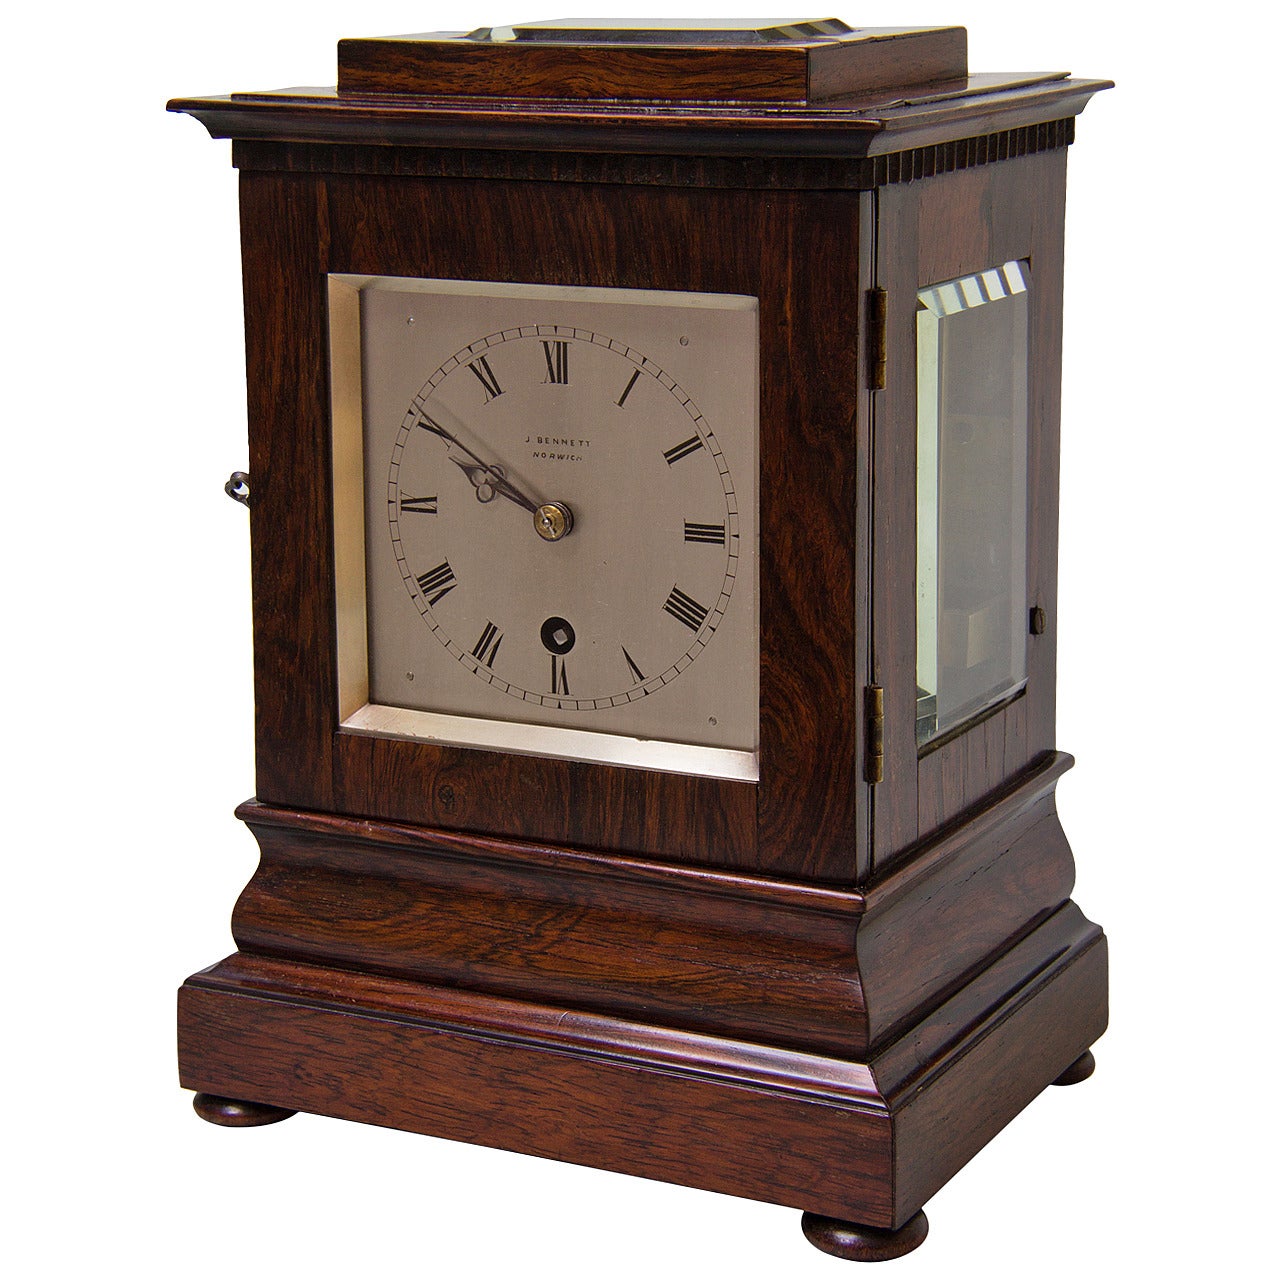 Small rosewood library clock signed J Bennett, Norwich. For Sale